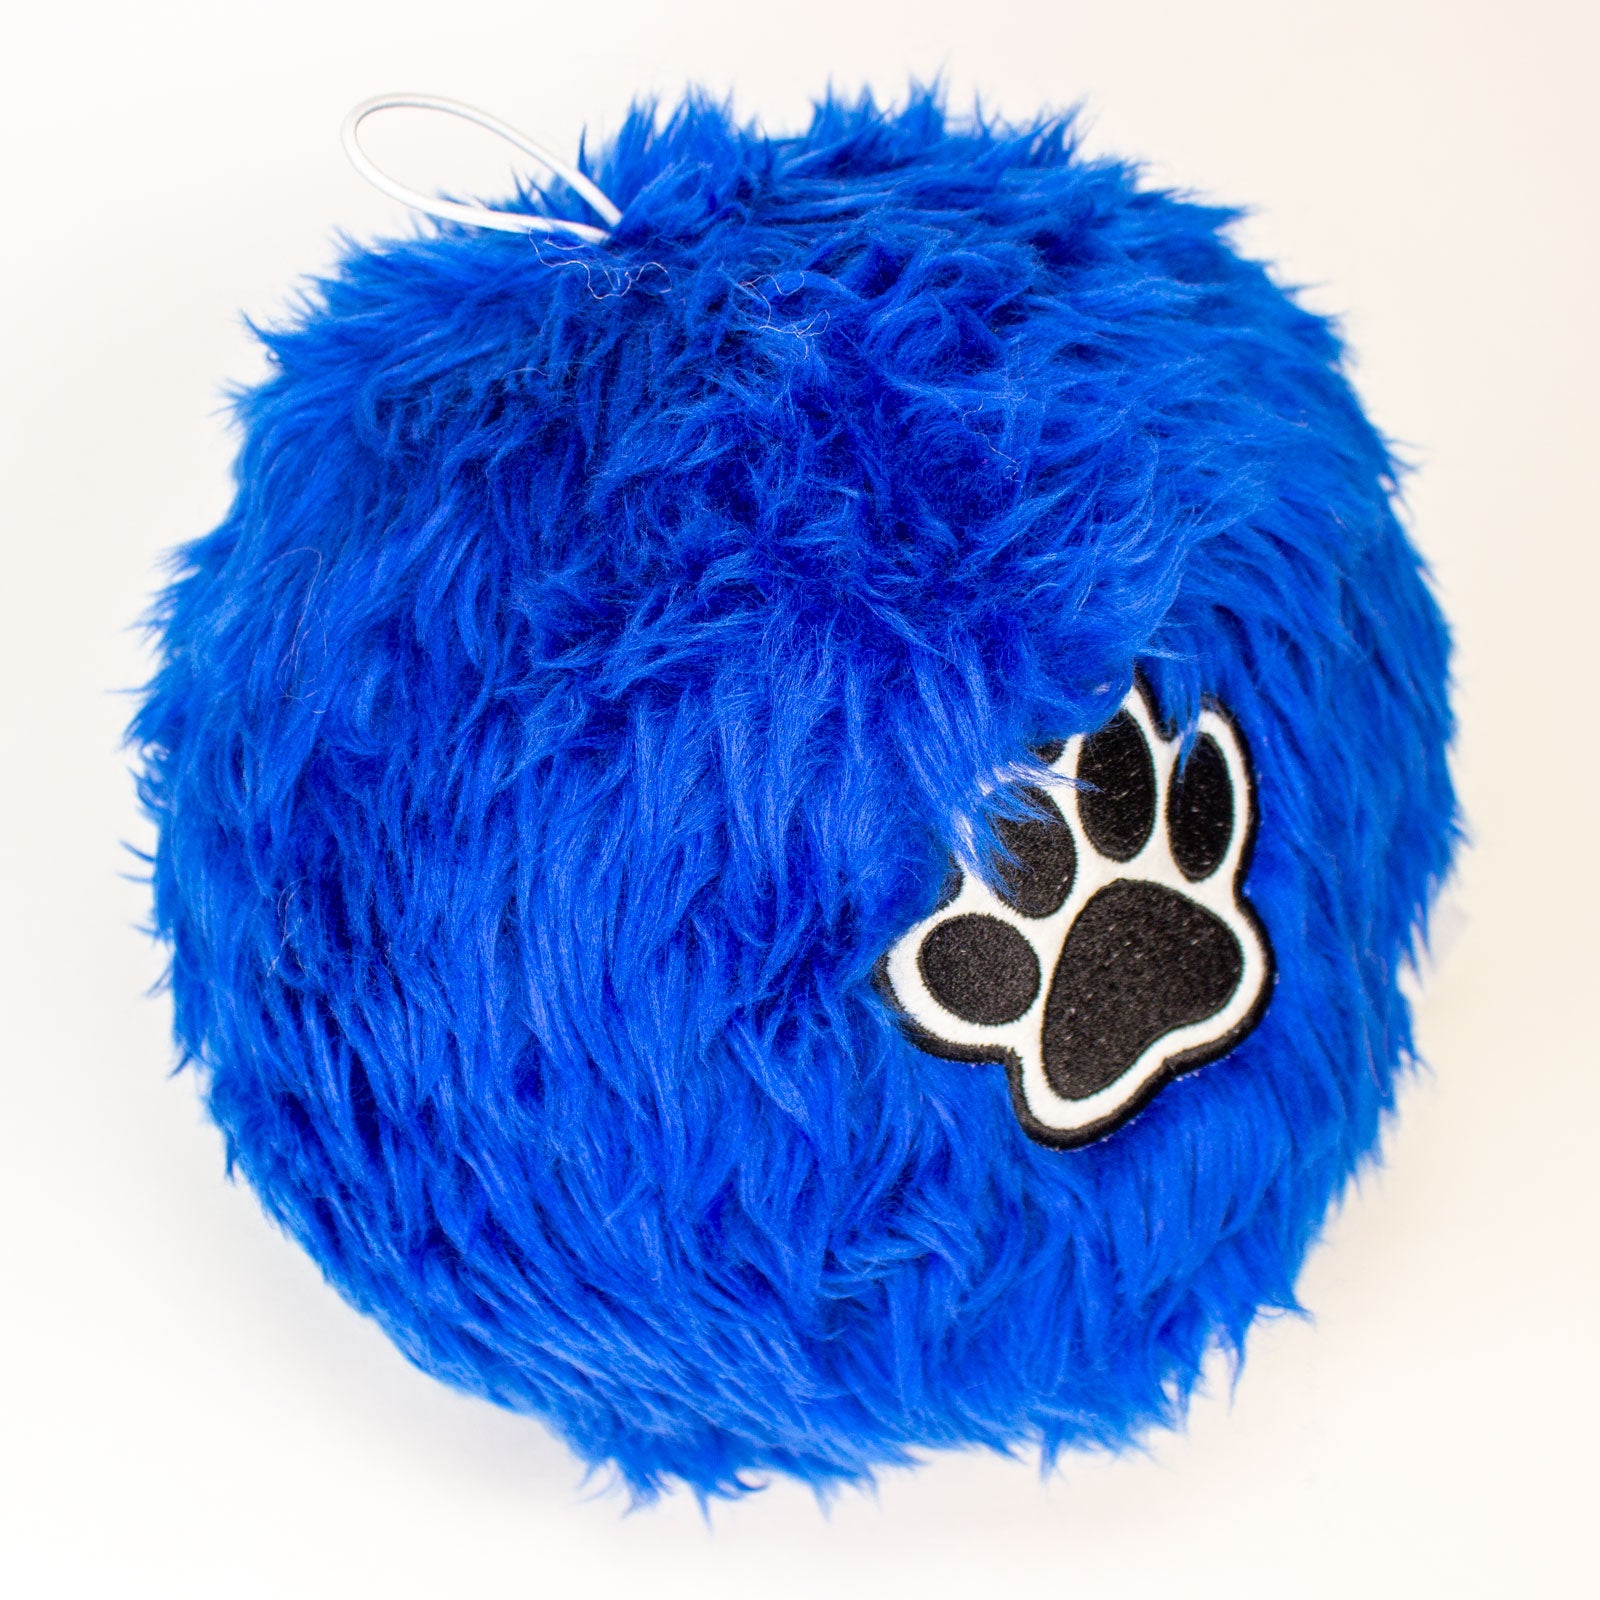 Soft Fluffy Ball For Dalmatian Dogs - Large Size